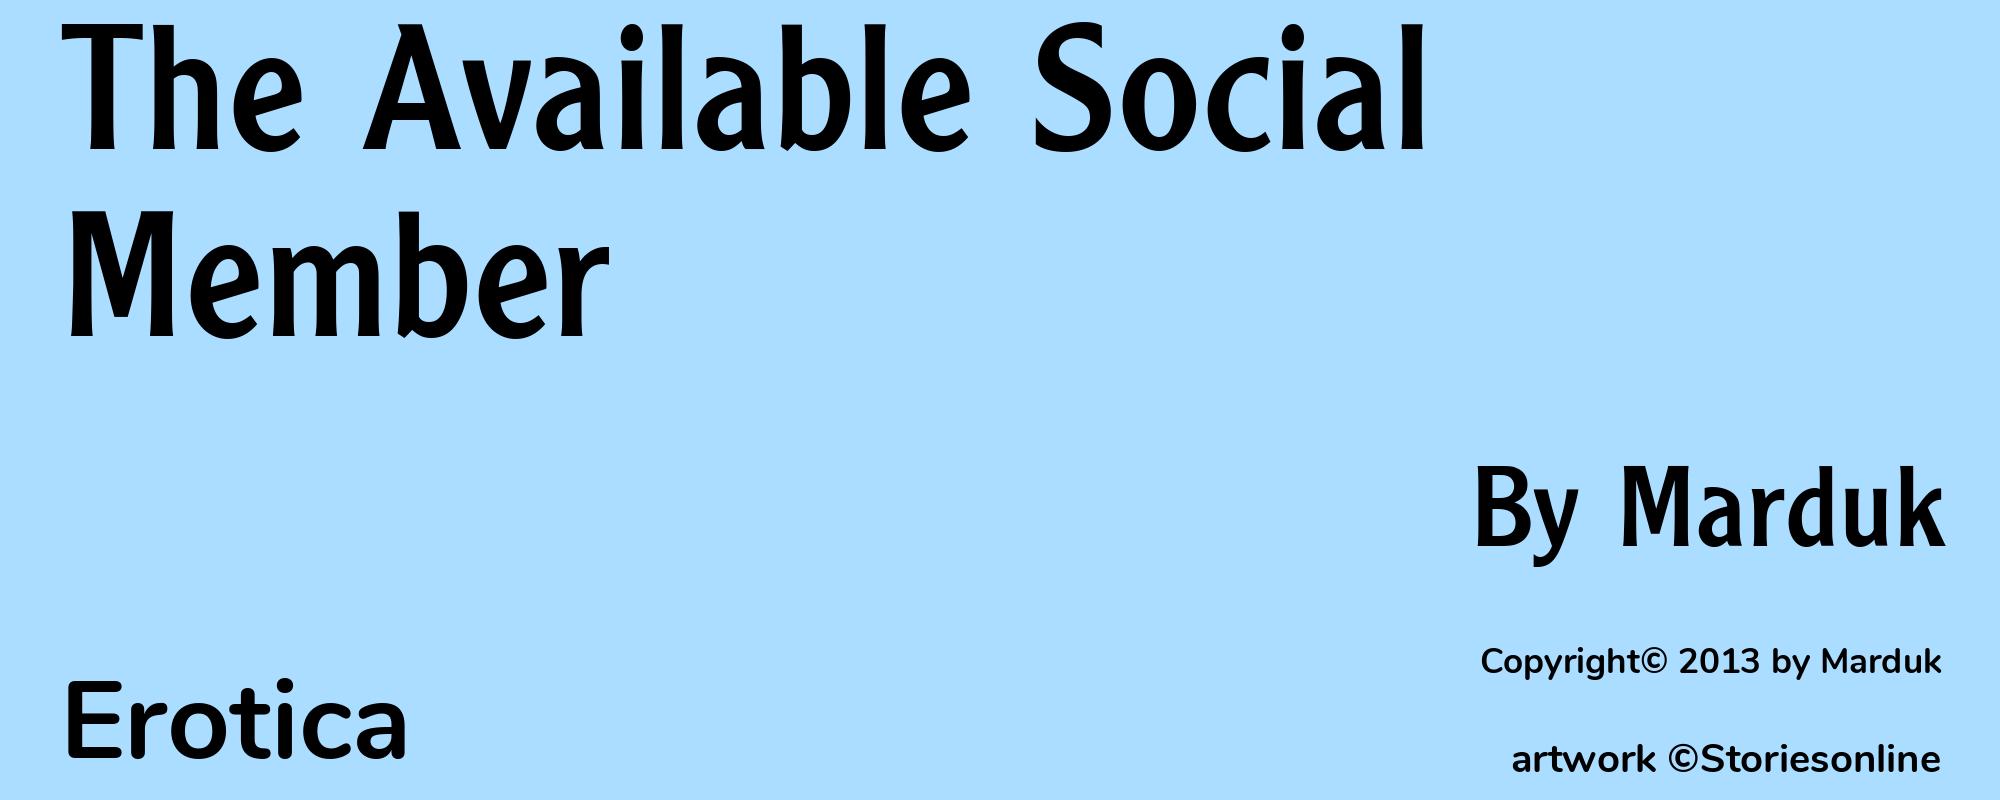 The Available Social Member - Cover